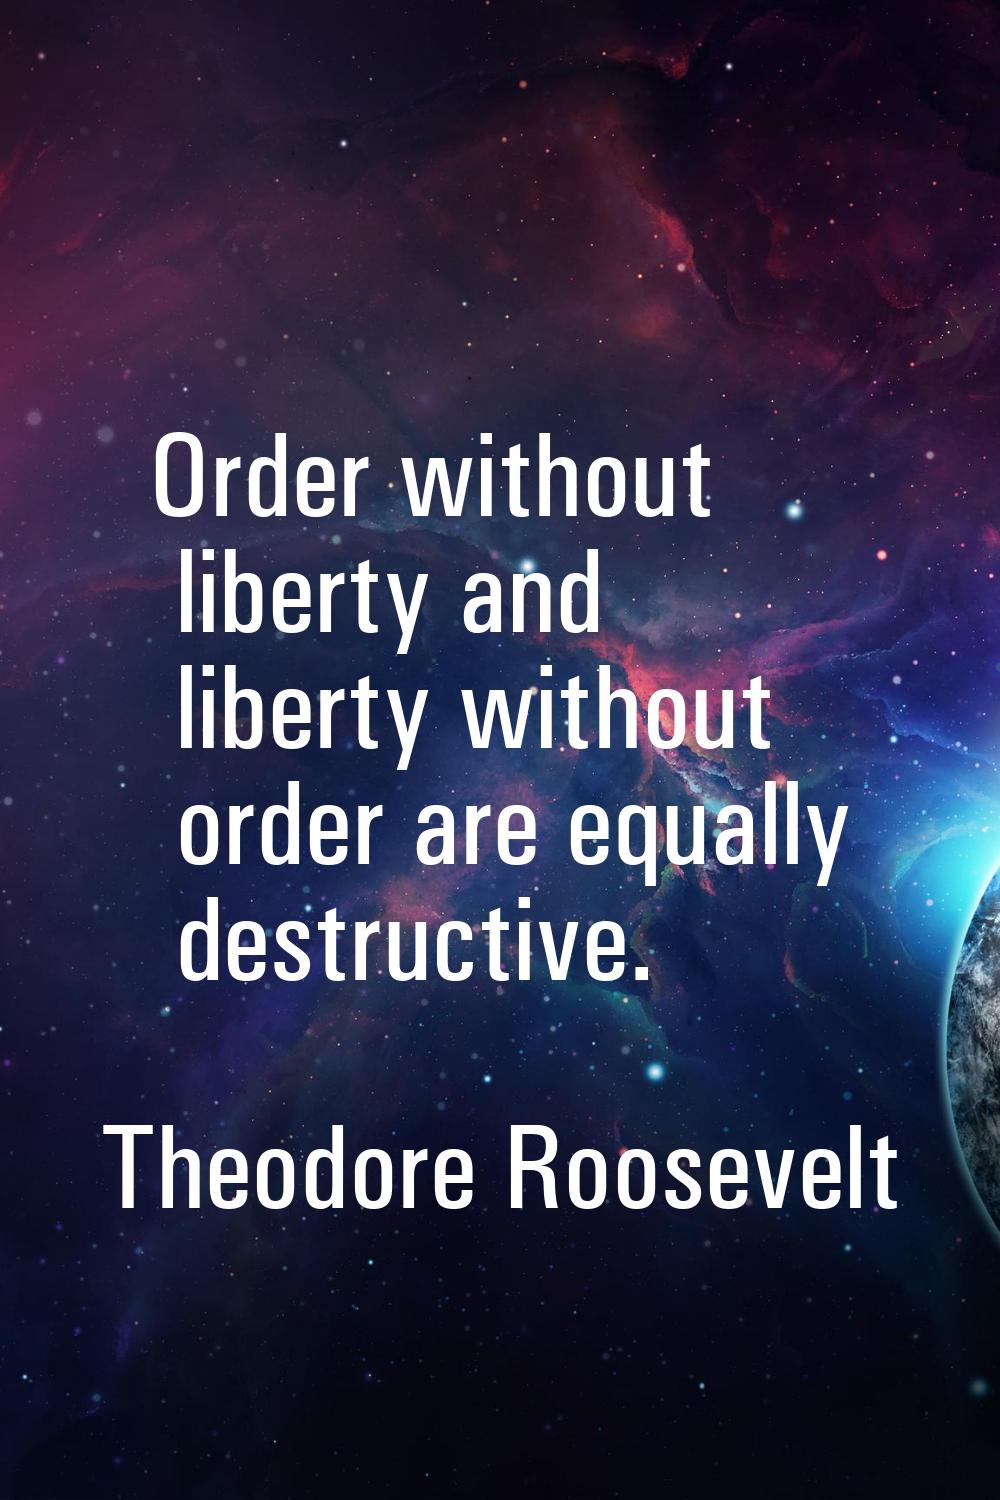 Order without liberty and liberty without order are equally destructive.